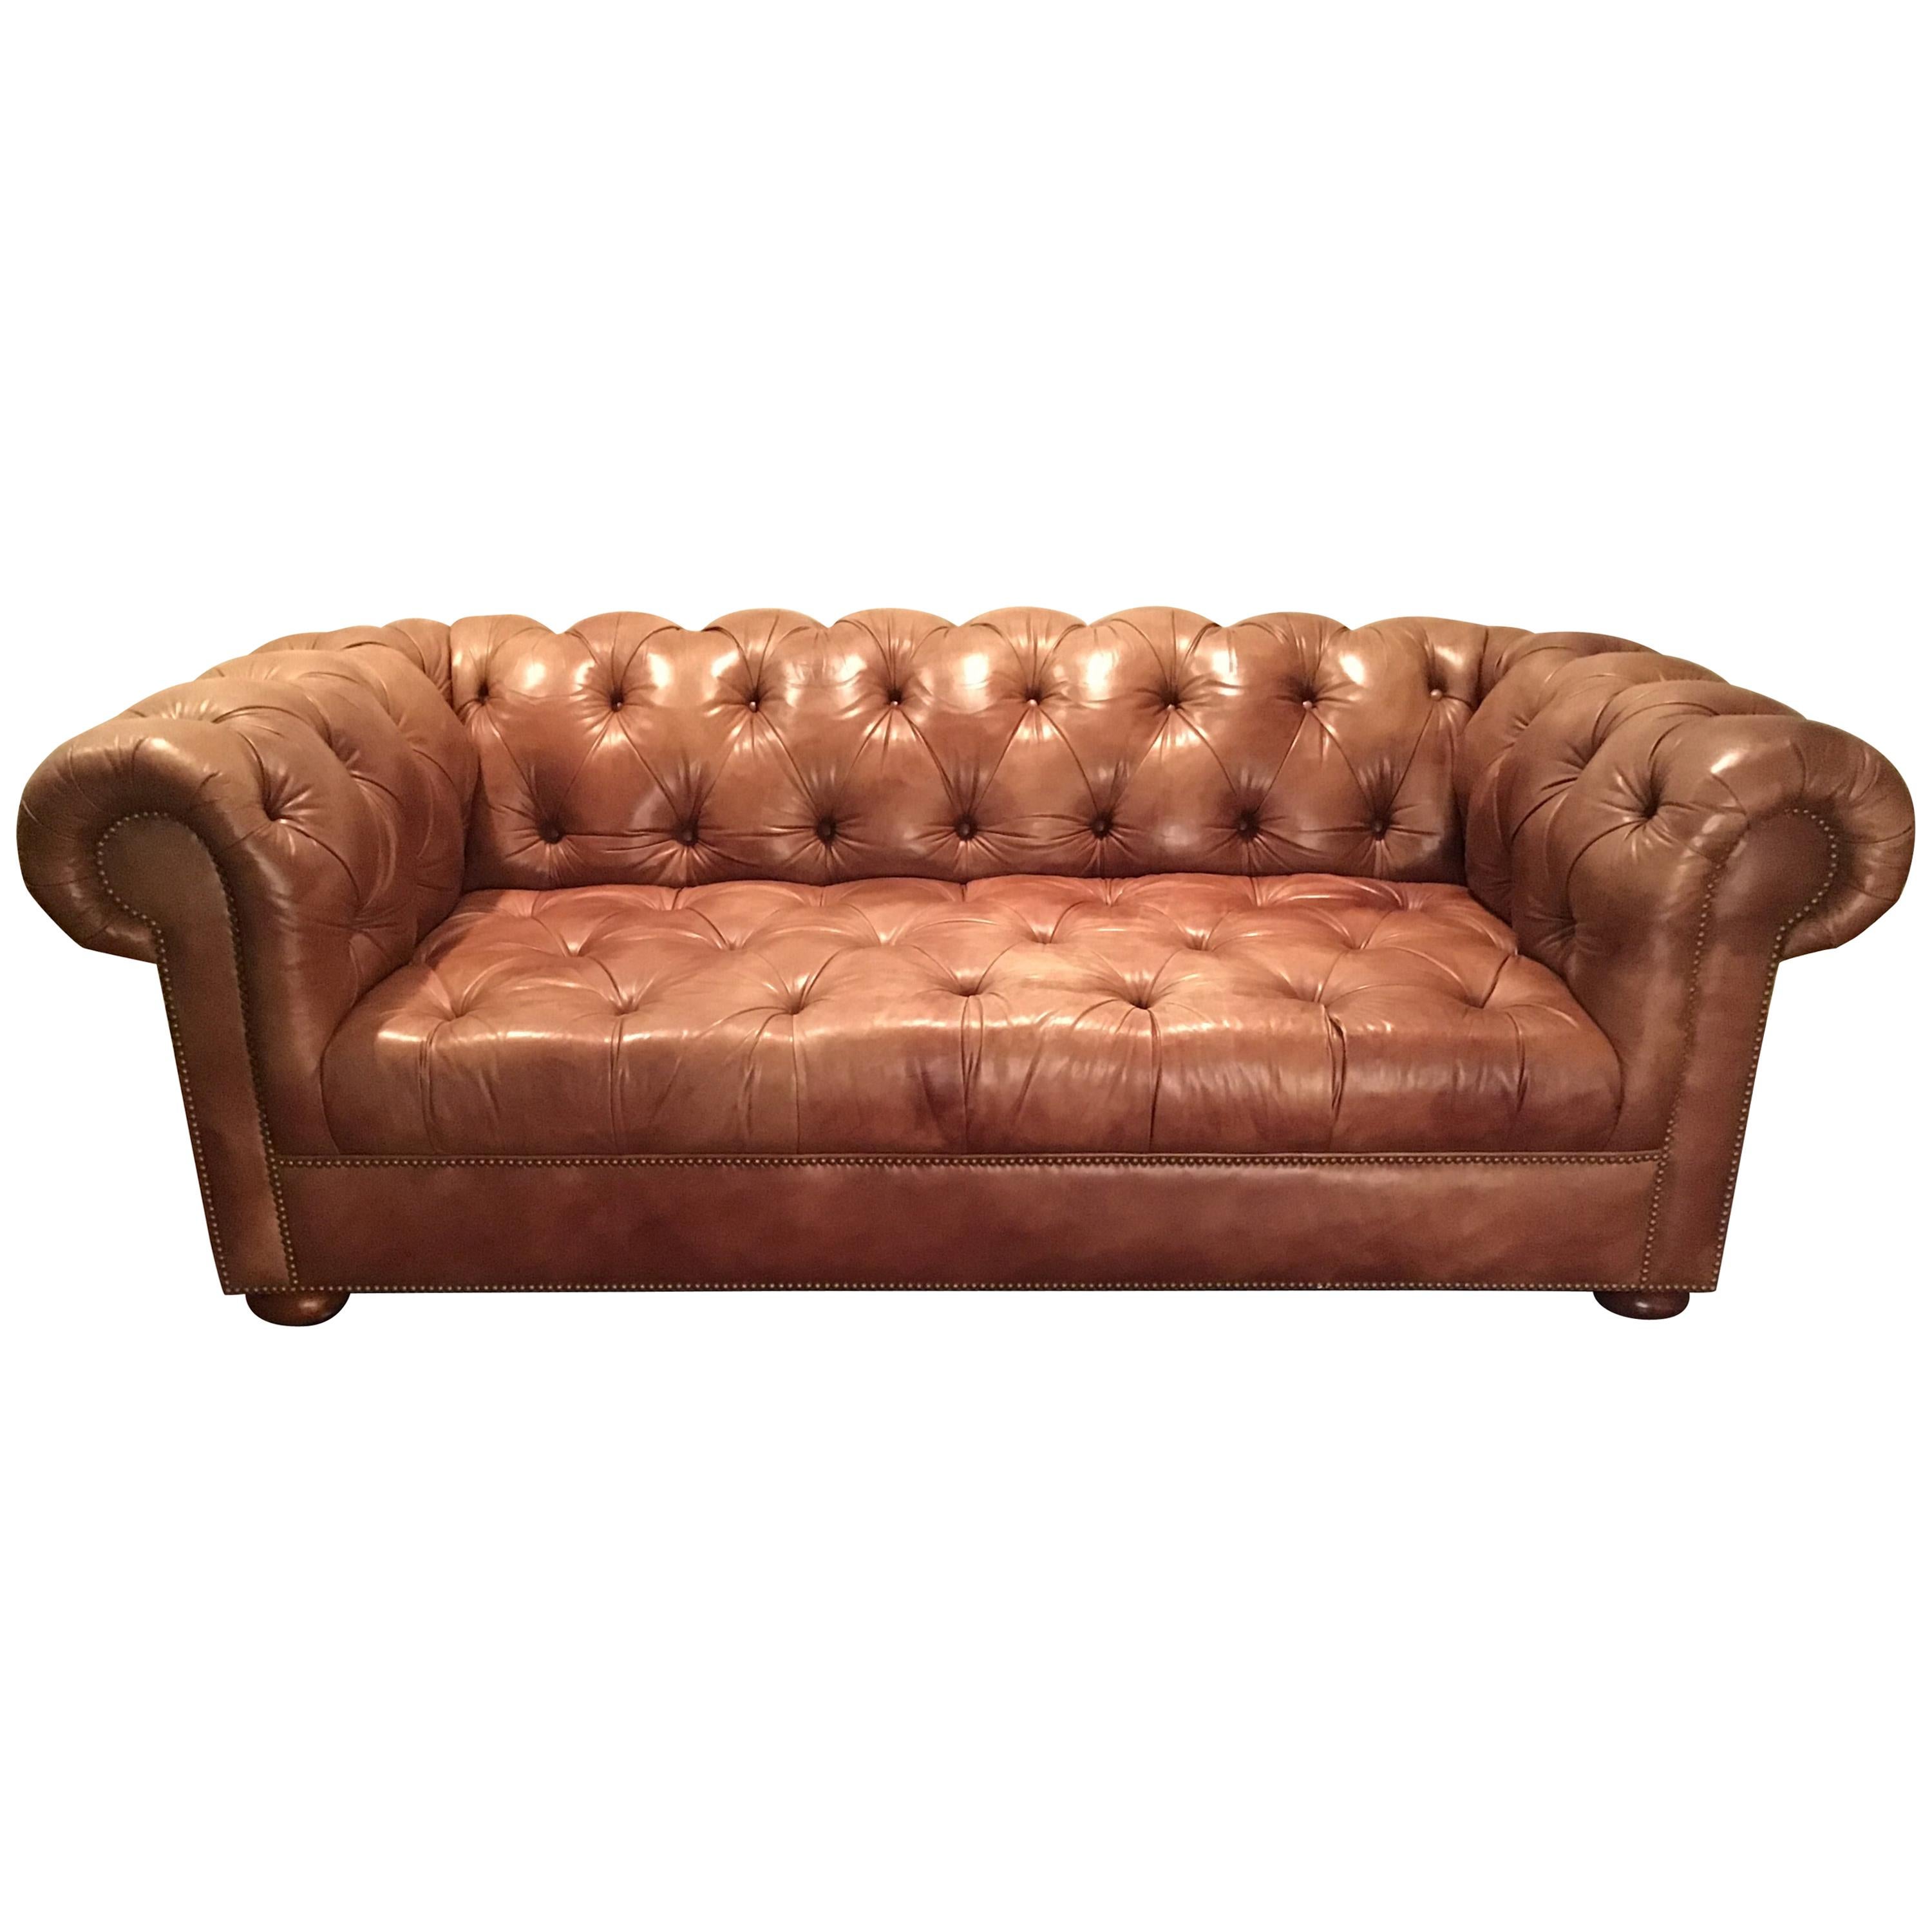 Leather Saddle Colored Chesterfield Sofa